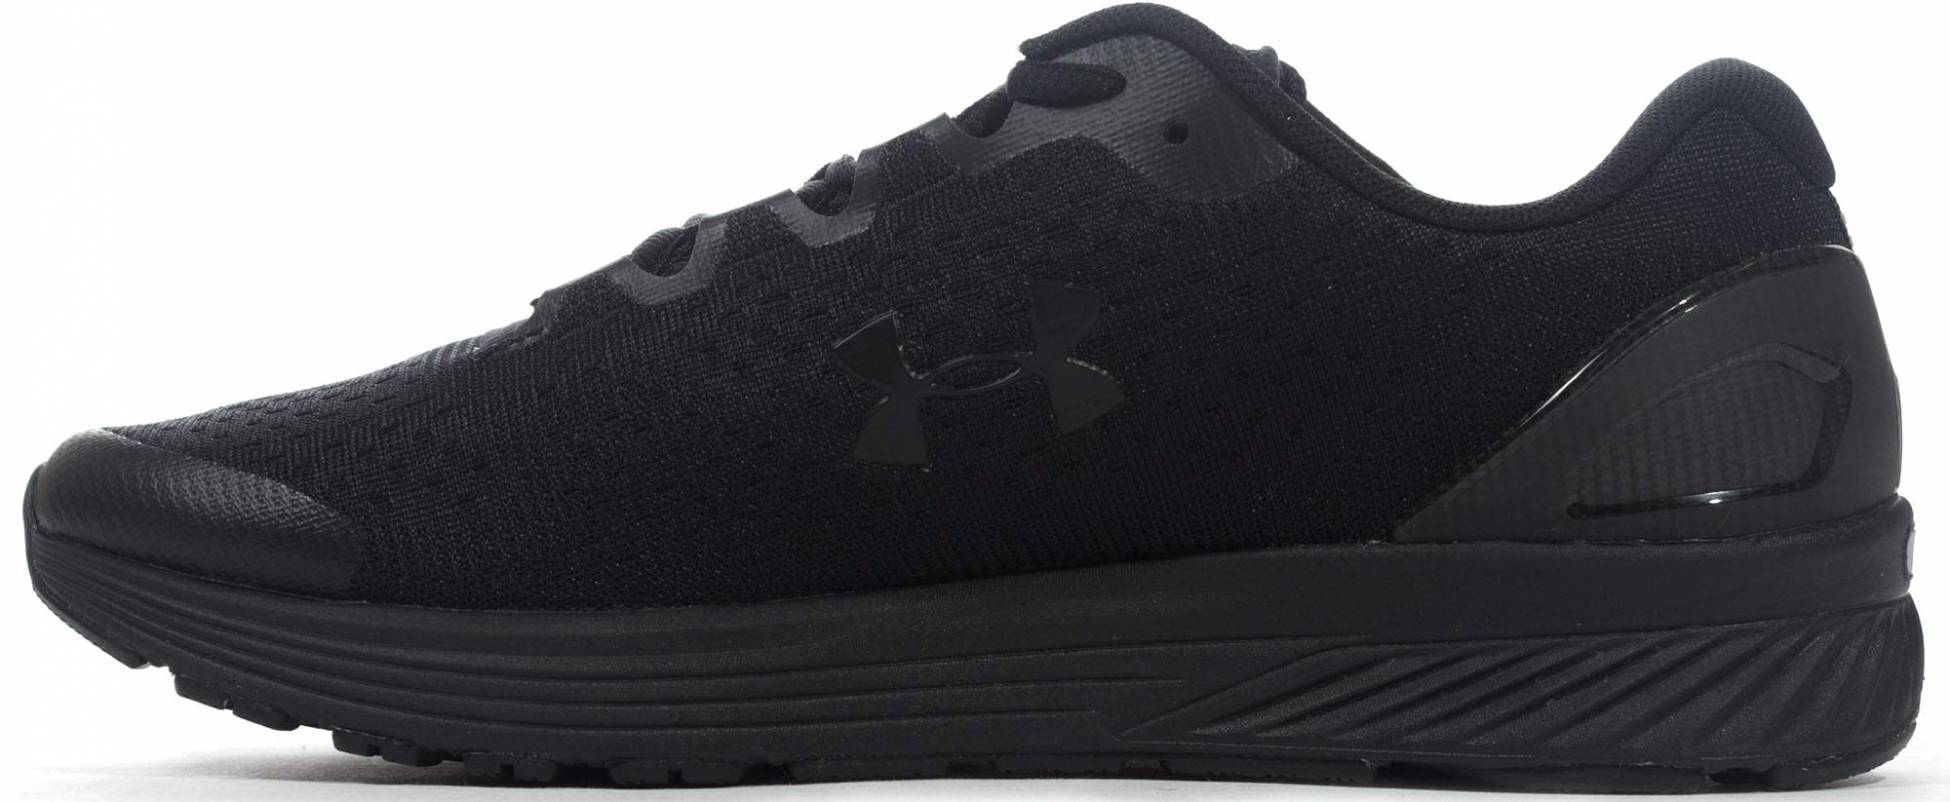 Review of Under Armour Charged Bandit 4 